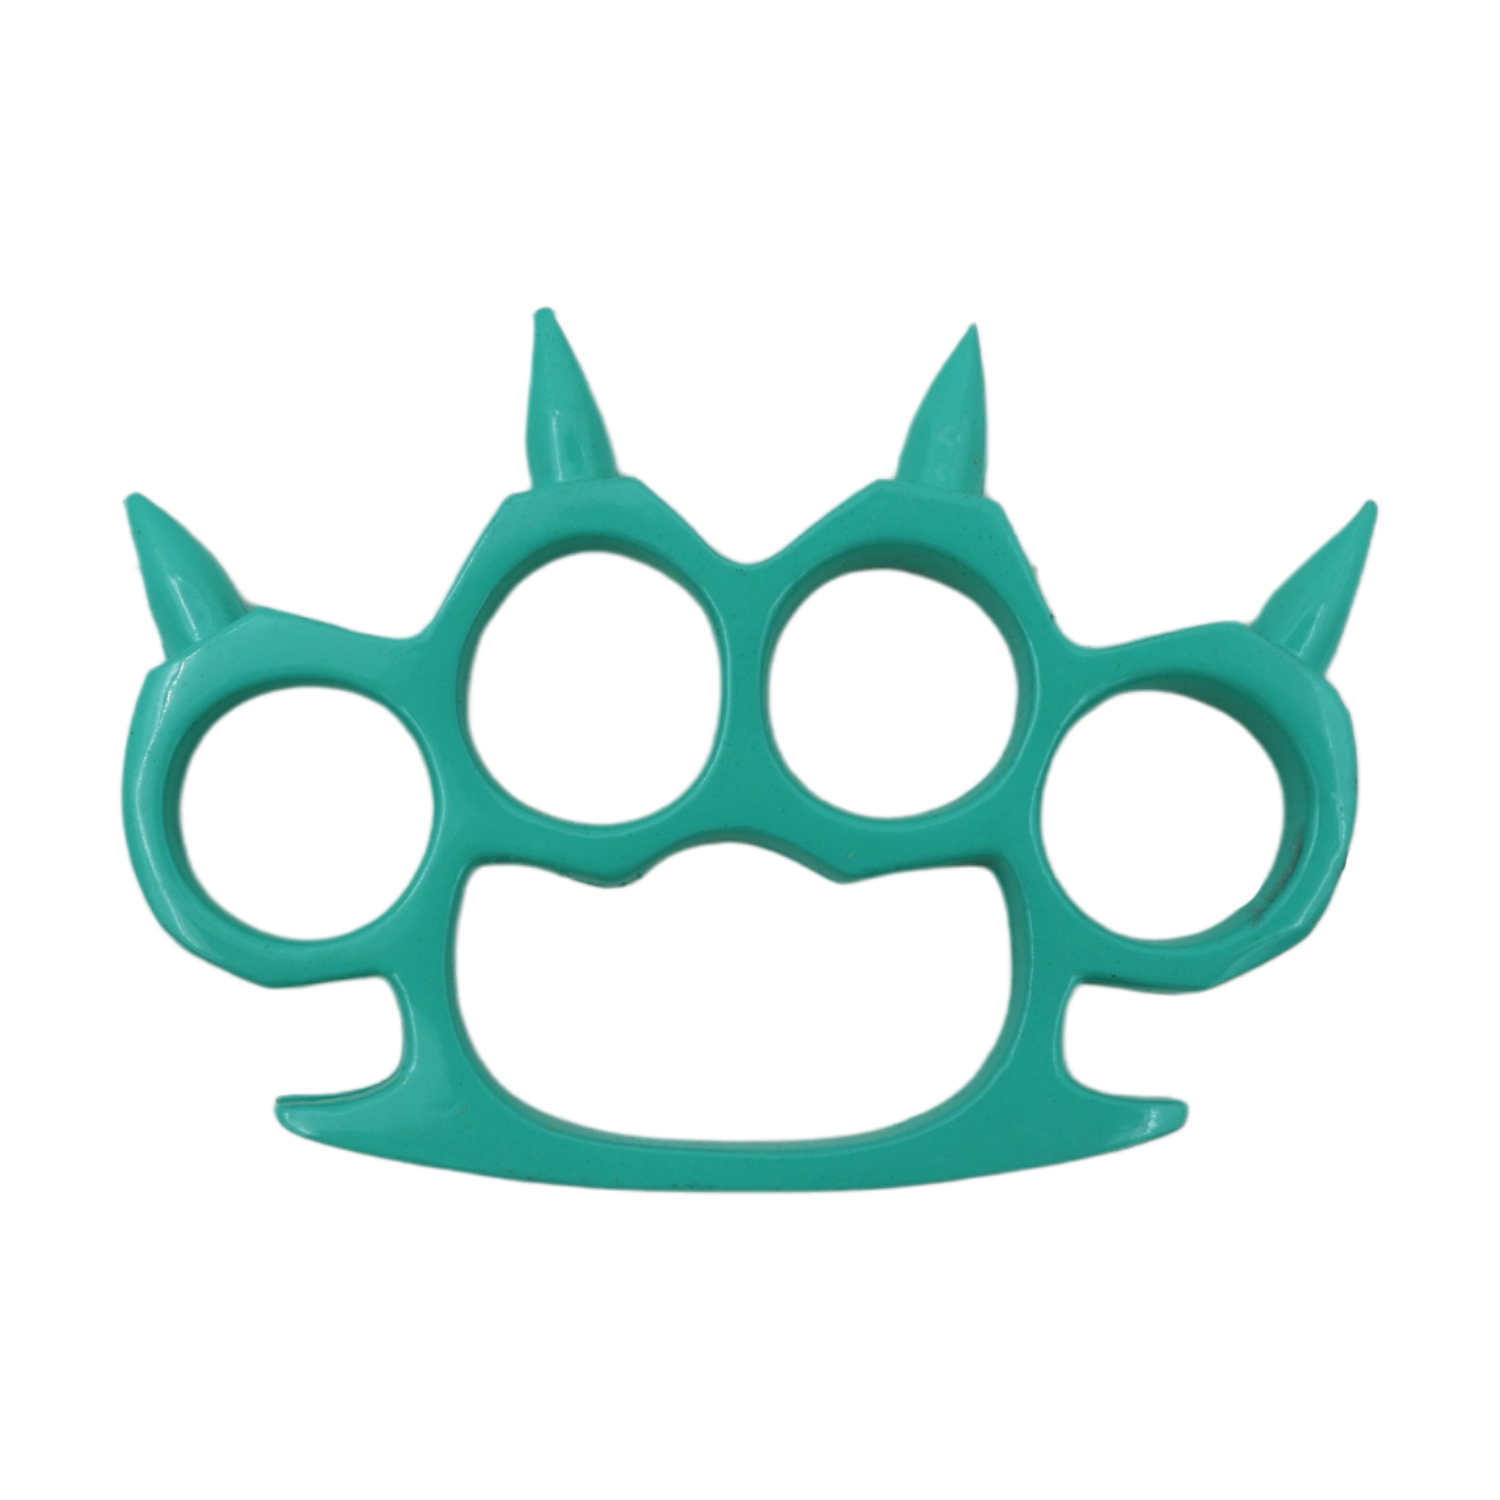 Spiked Solid Steal Knuckle Duster - Teal – Panther Wholesale